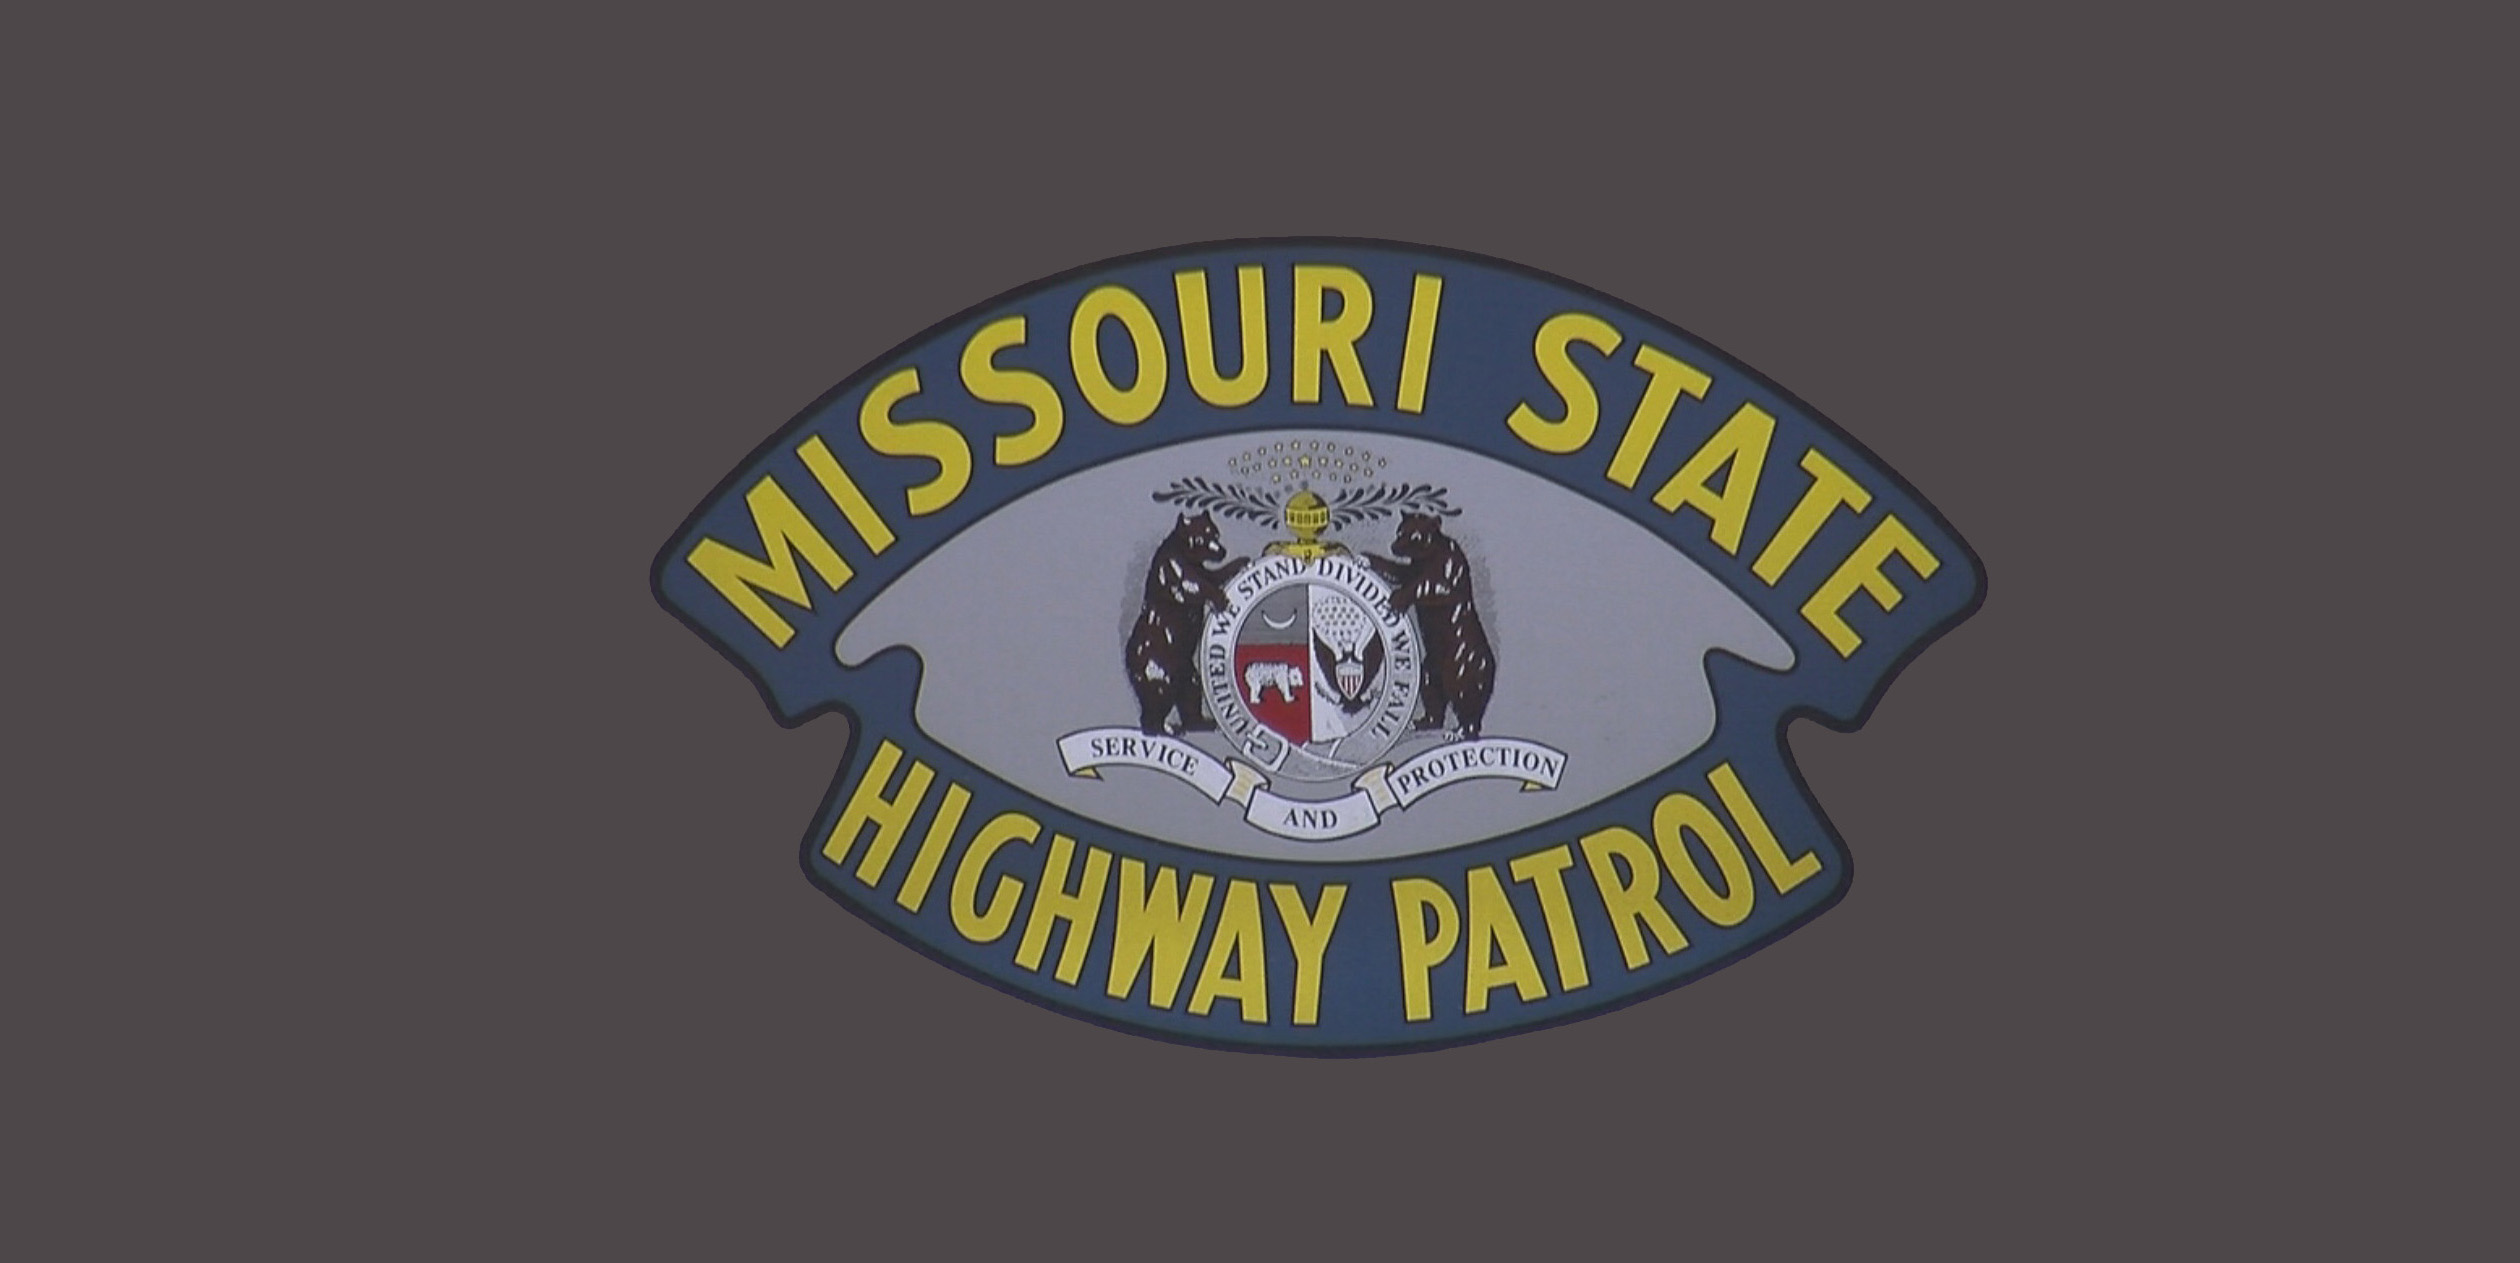 Three Arrests By Highway Patrol Monday In The Area Counties